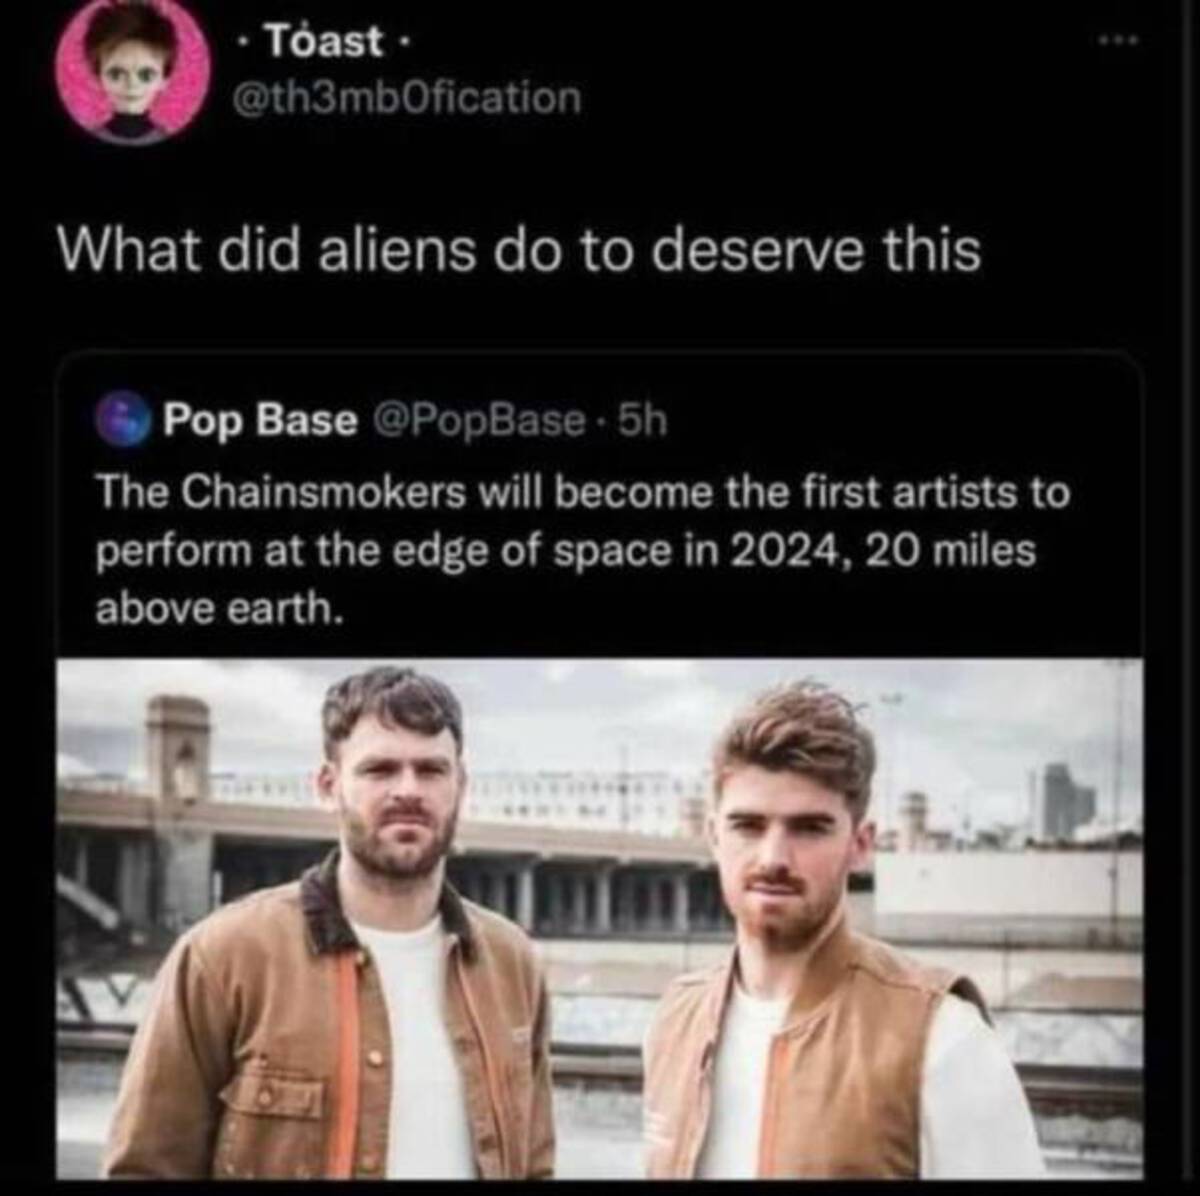 chainsmokers band - Toast. What did aliens do to deserve this Pop Base 5h The Chainsmokers will become the first artists to perform at the edge of space in 2024, 20 miles above earth.